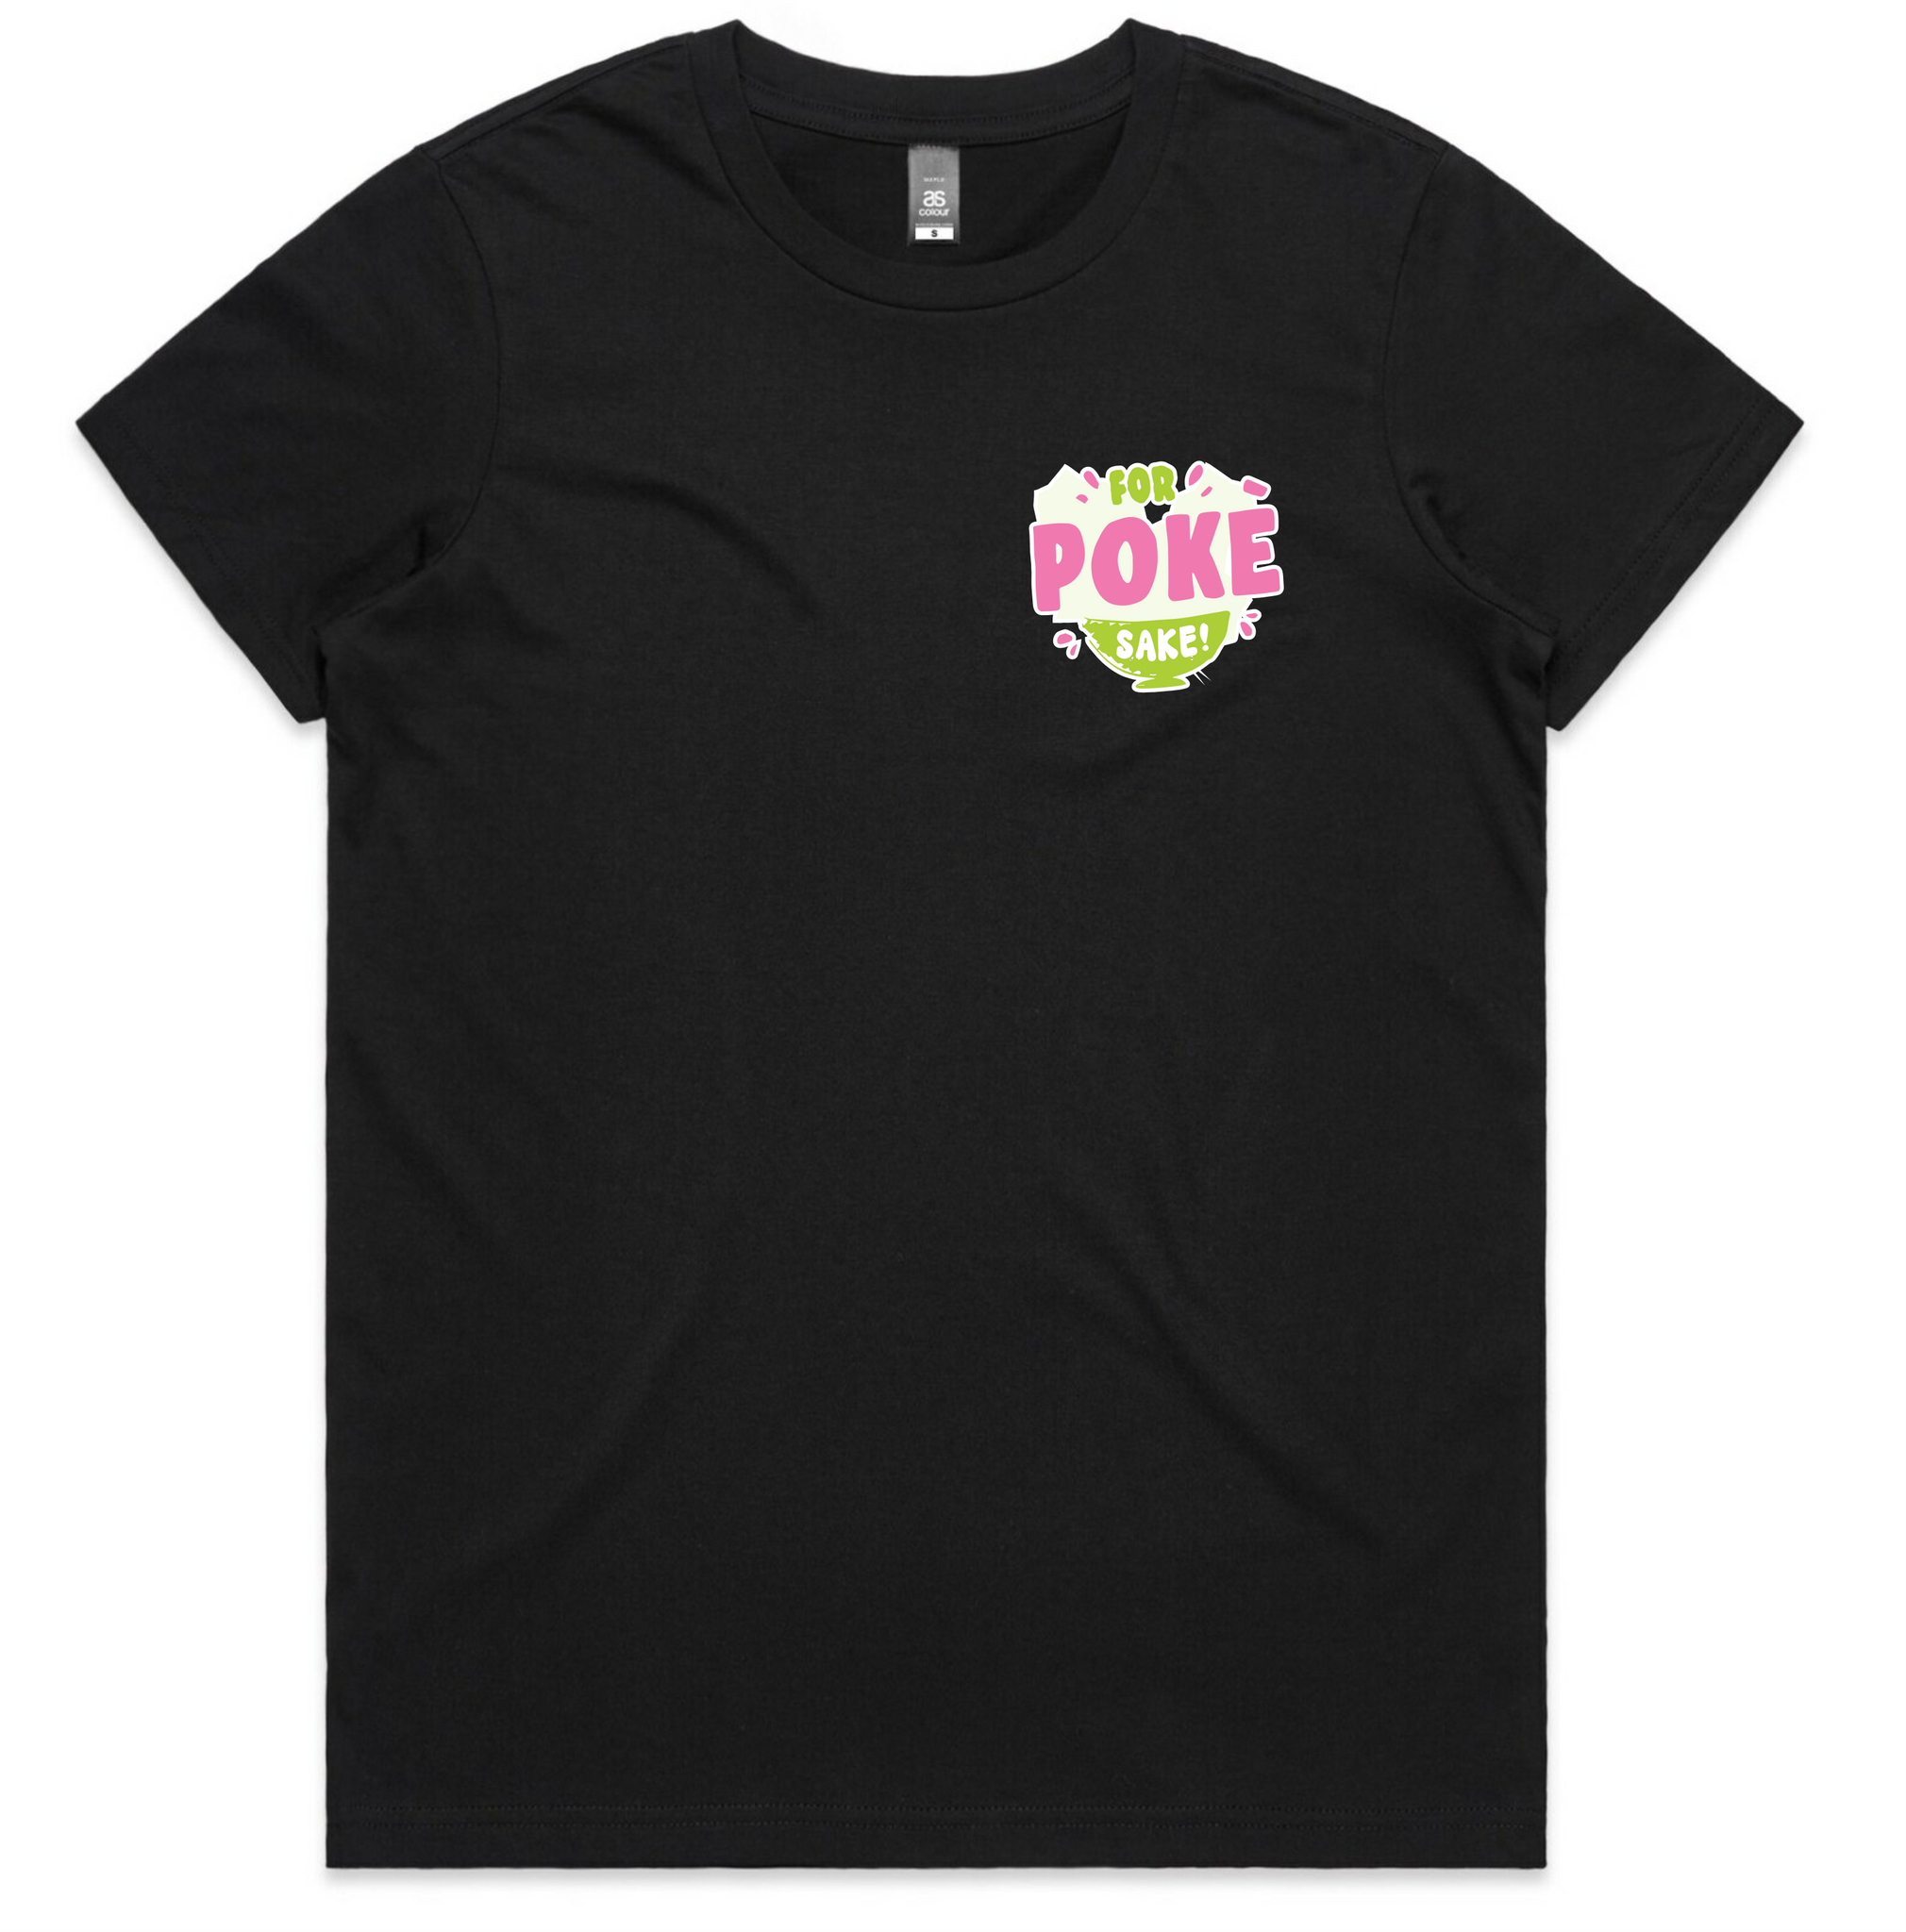 For Poke Sake - Front and Back -  Womens Tee